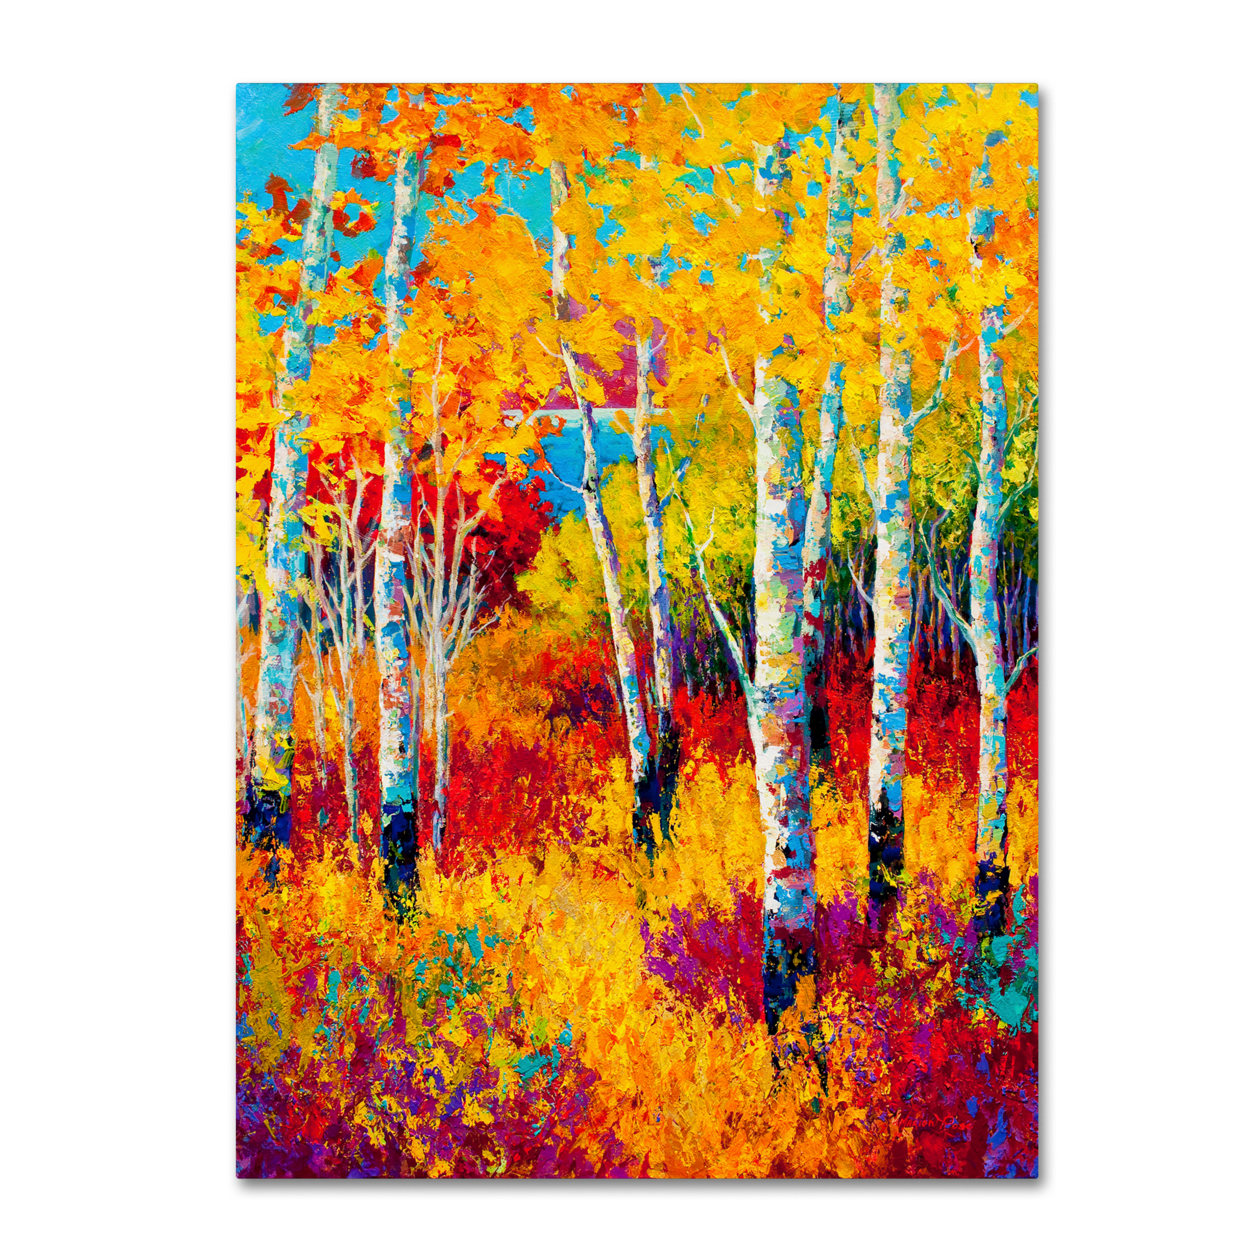 Marion Rose 'Autumn Dreams' Ready To Hang Canvas Art 24 X 32 Inches Made In USA